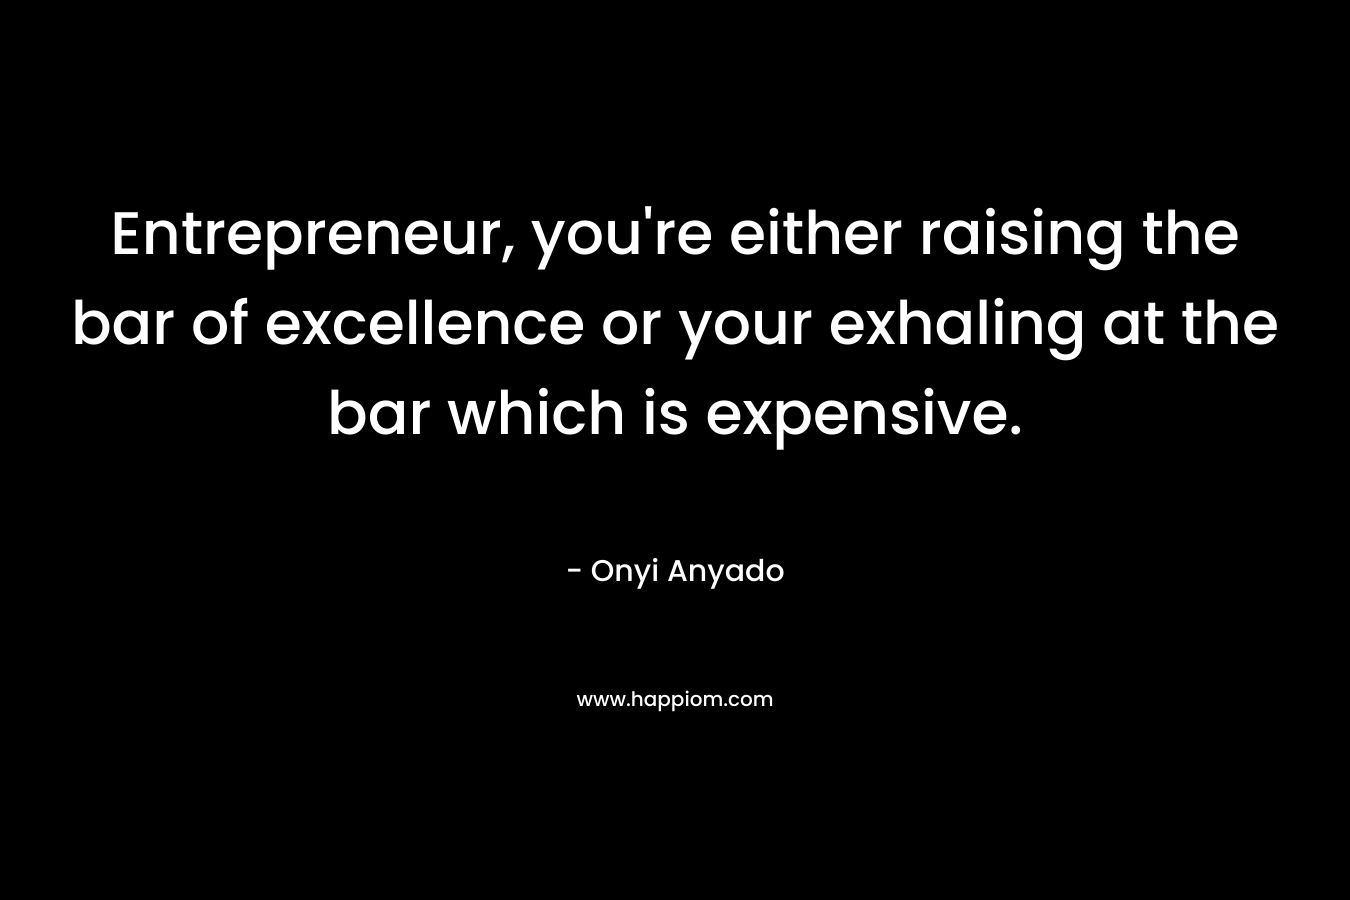 Entrepreneur, you're either raising the bar of excellence or your exhaling at the bar which is expensive.